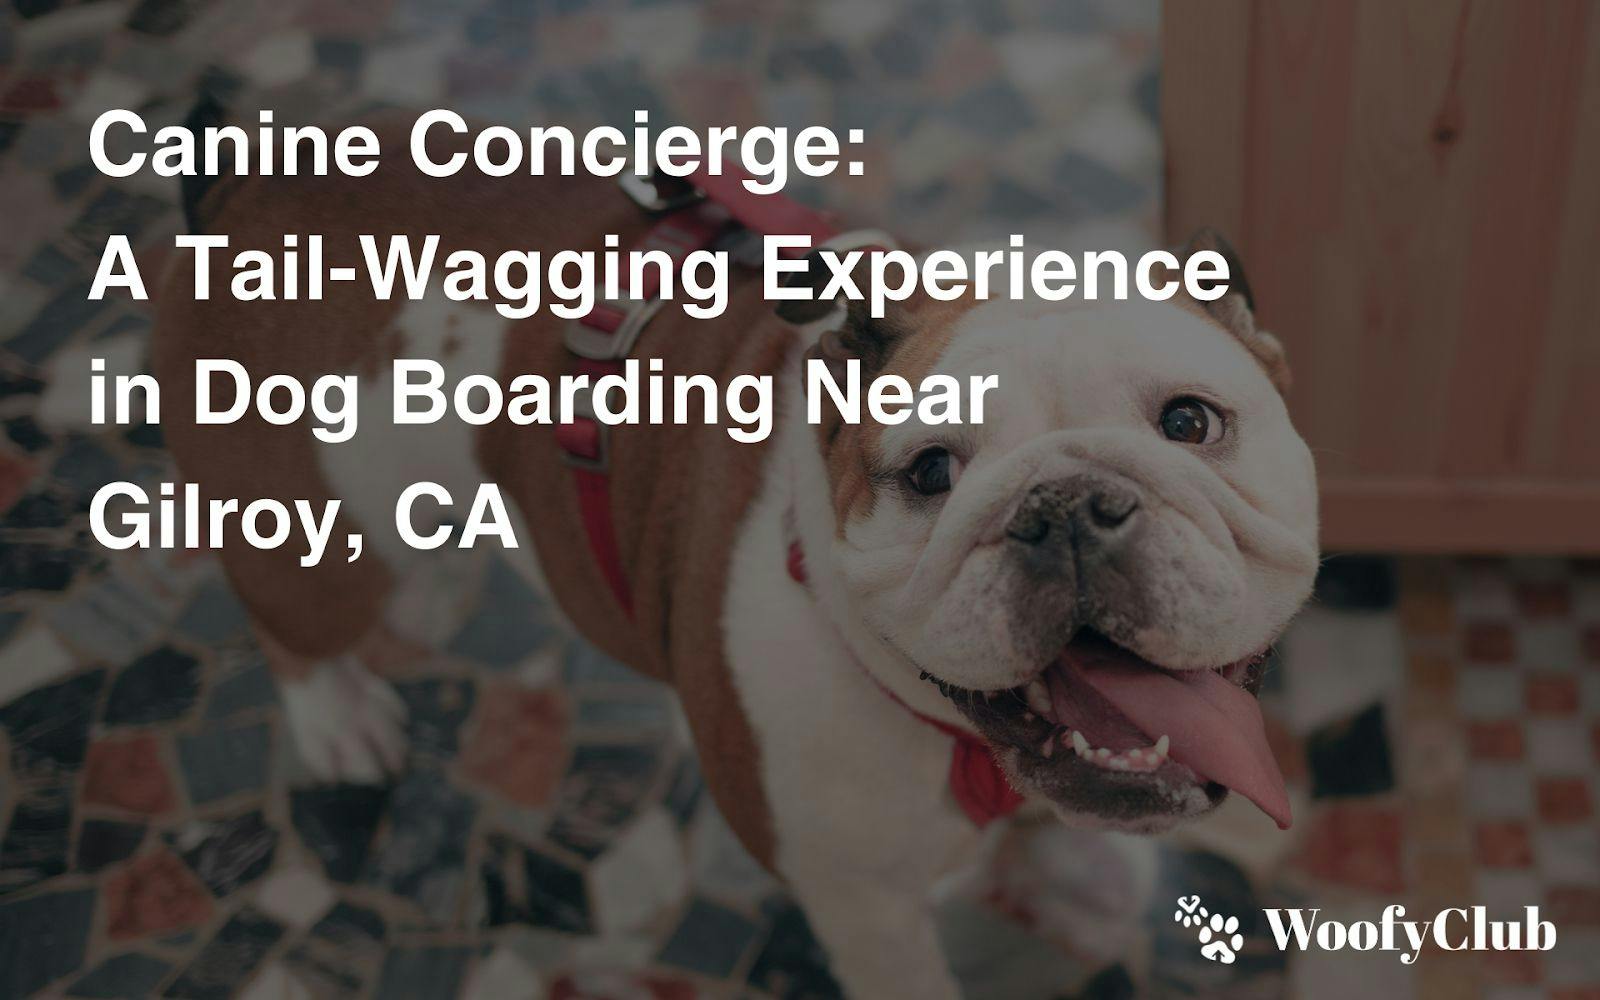 Canine Concierge: A Tail-Wagging Experience In Dog Boarding Near Gilroy, CA